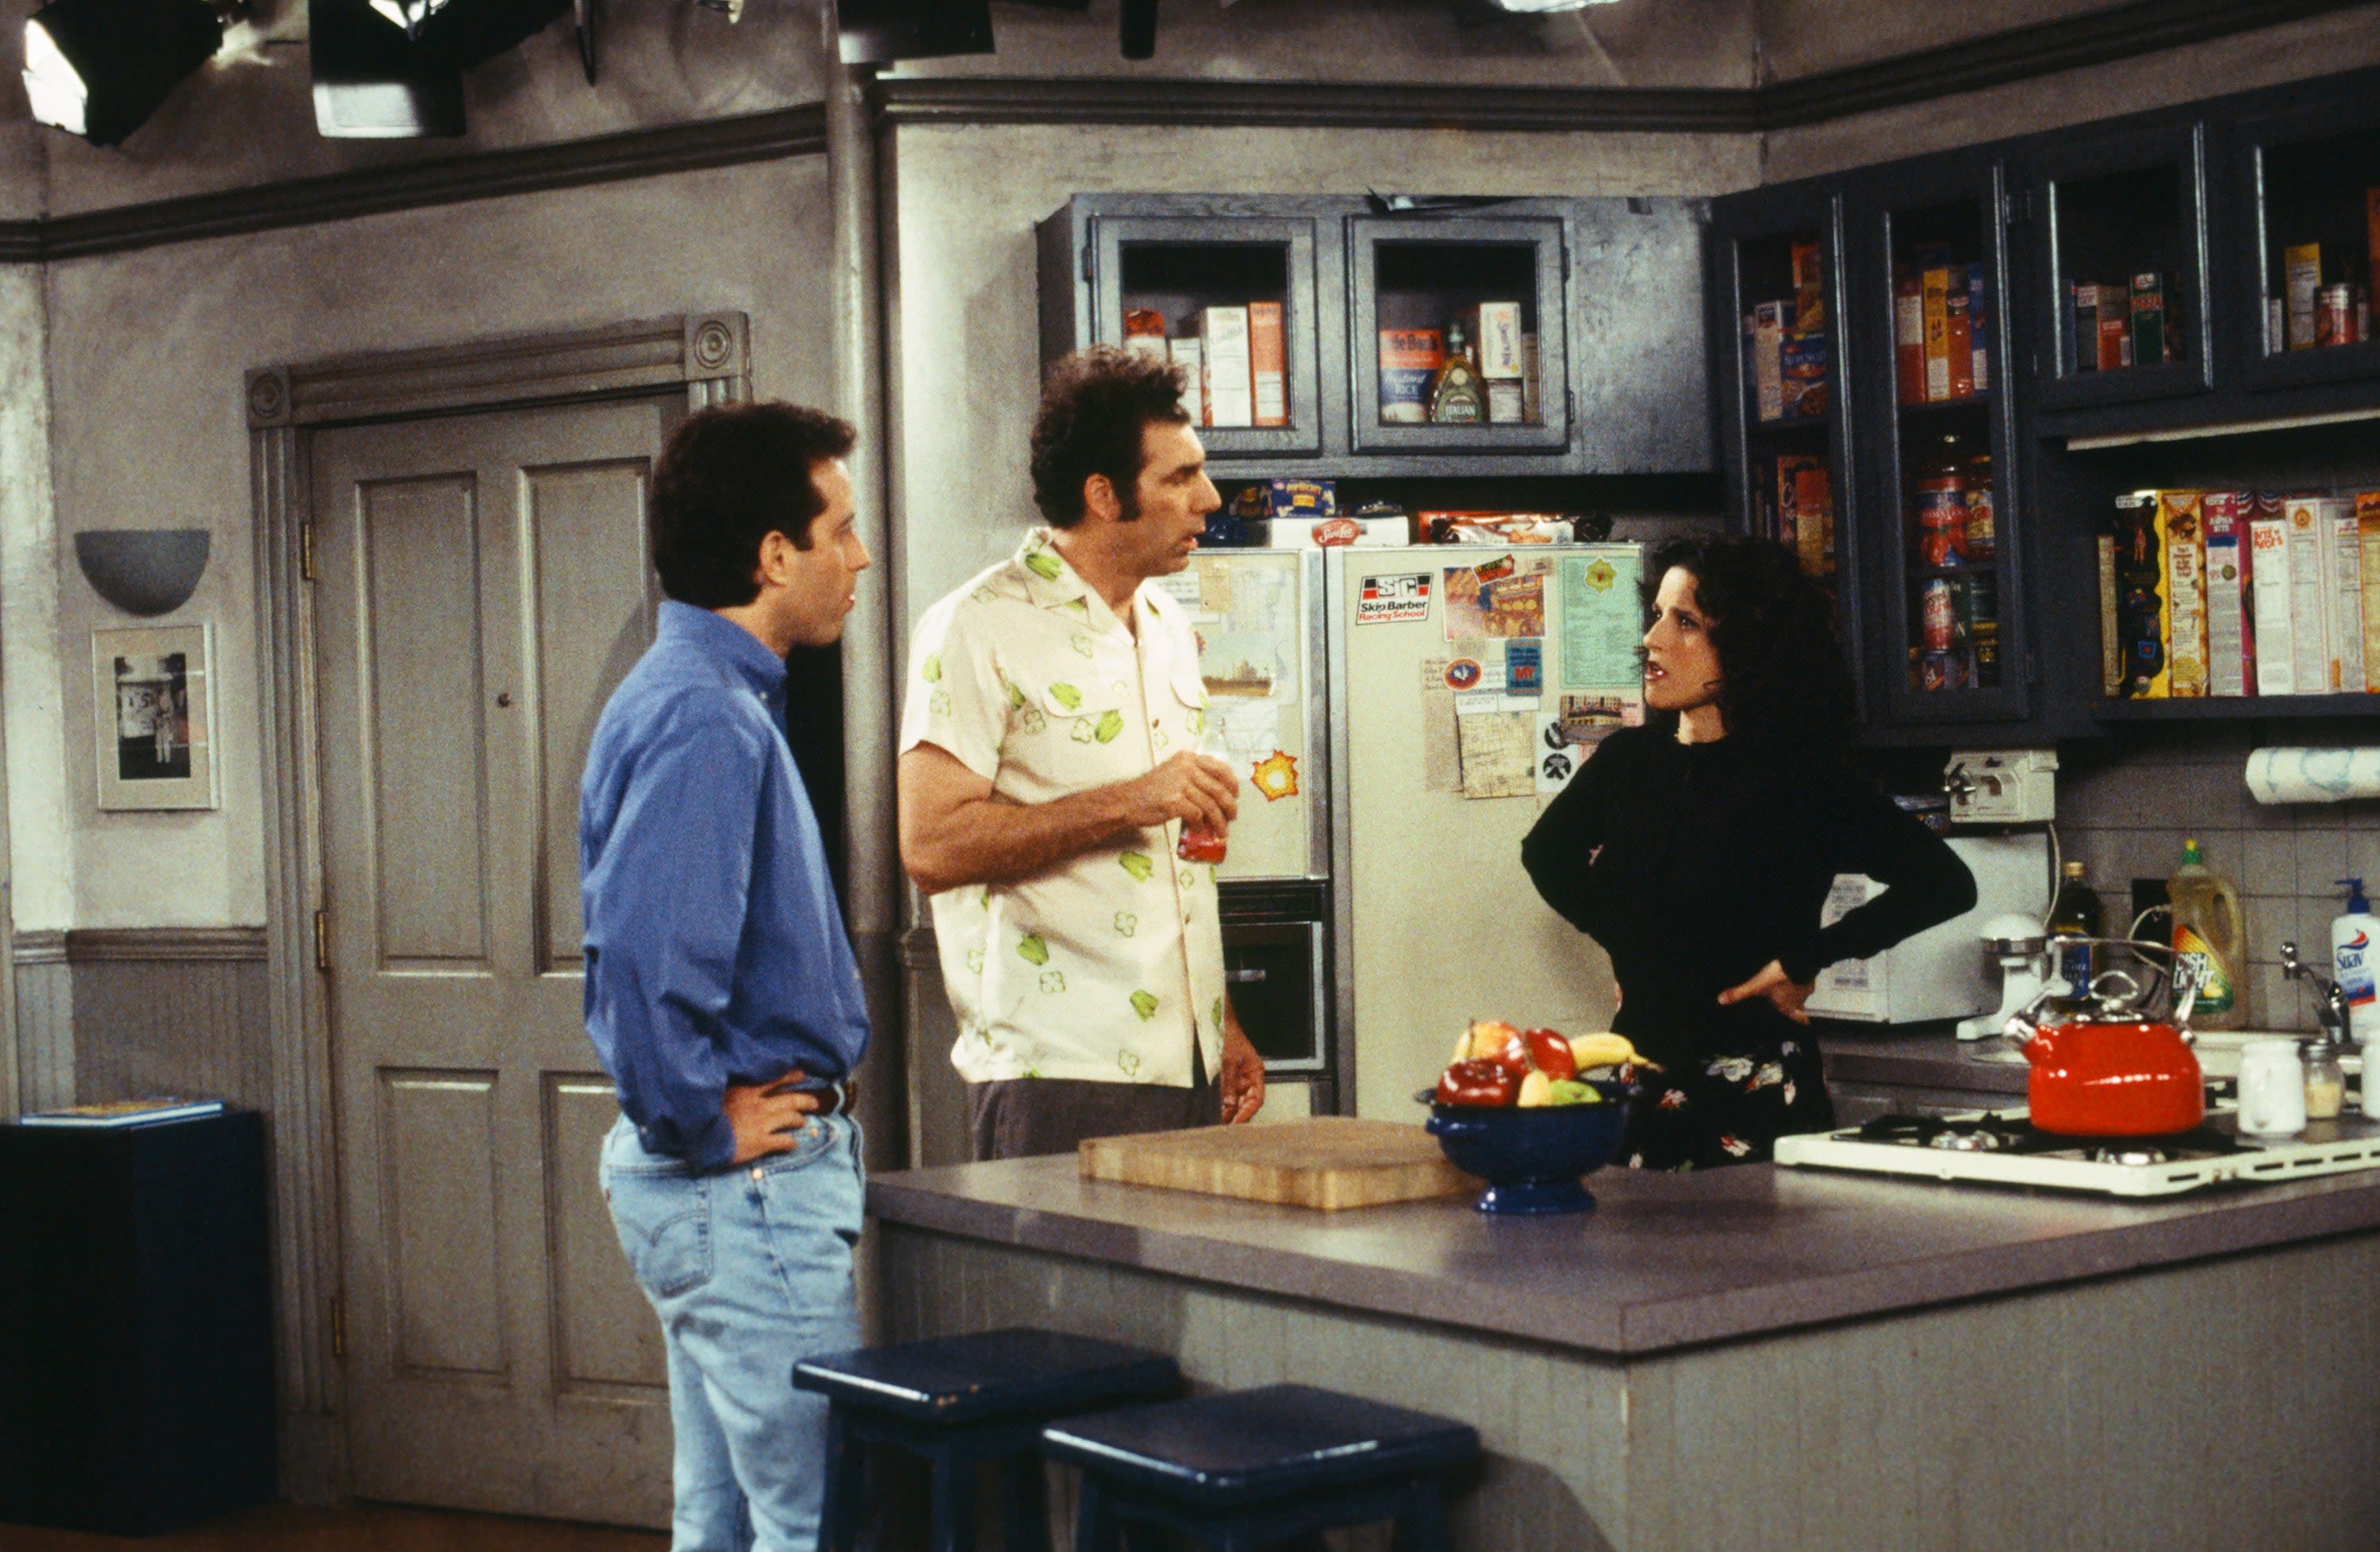 6 Secrets About the Seinfeld Sets You Probably Didn’t Know